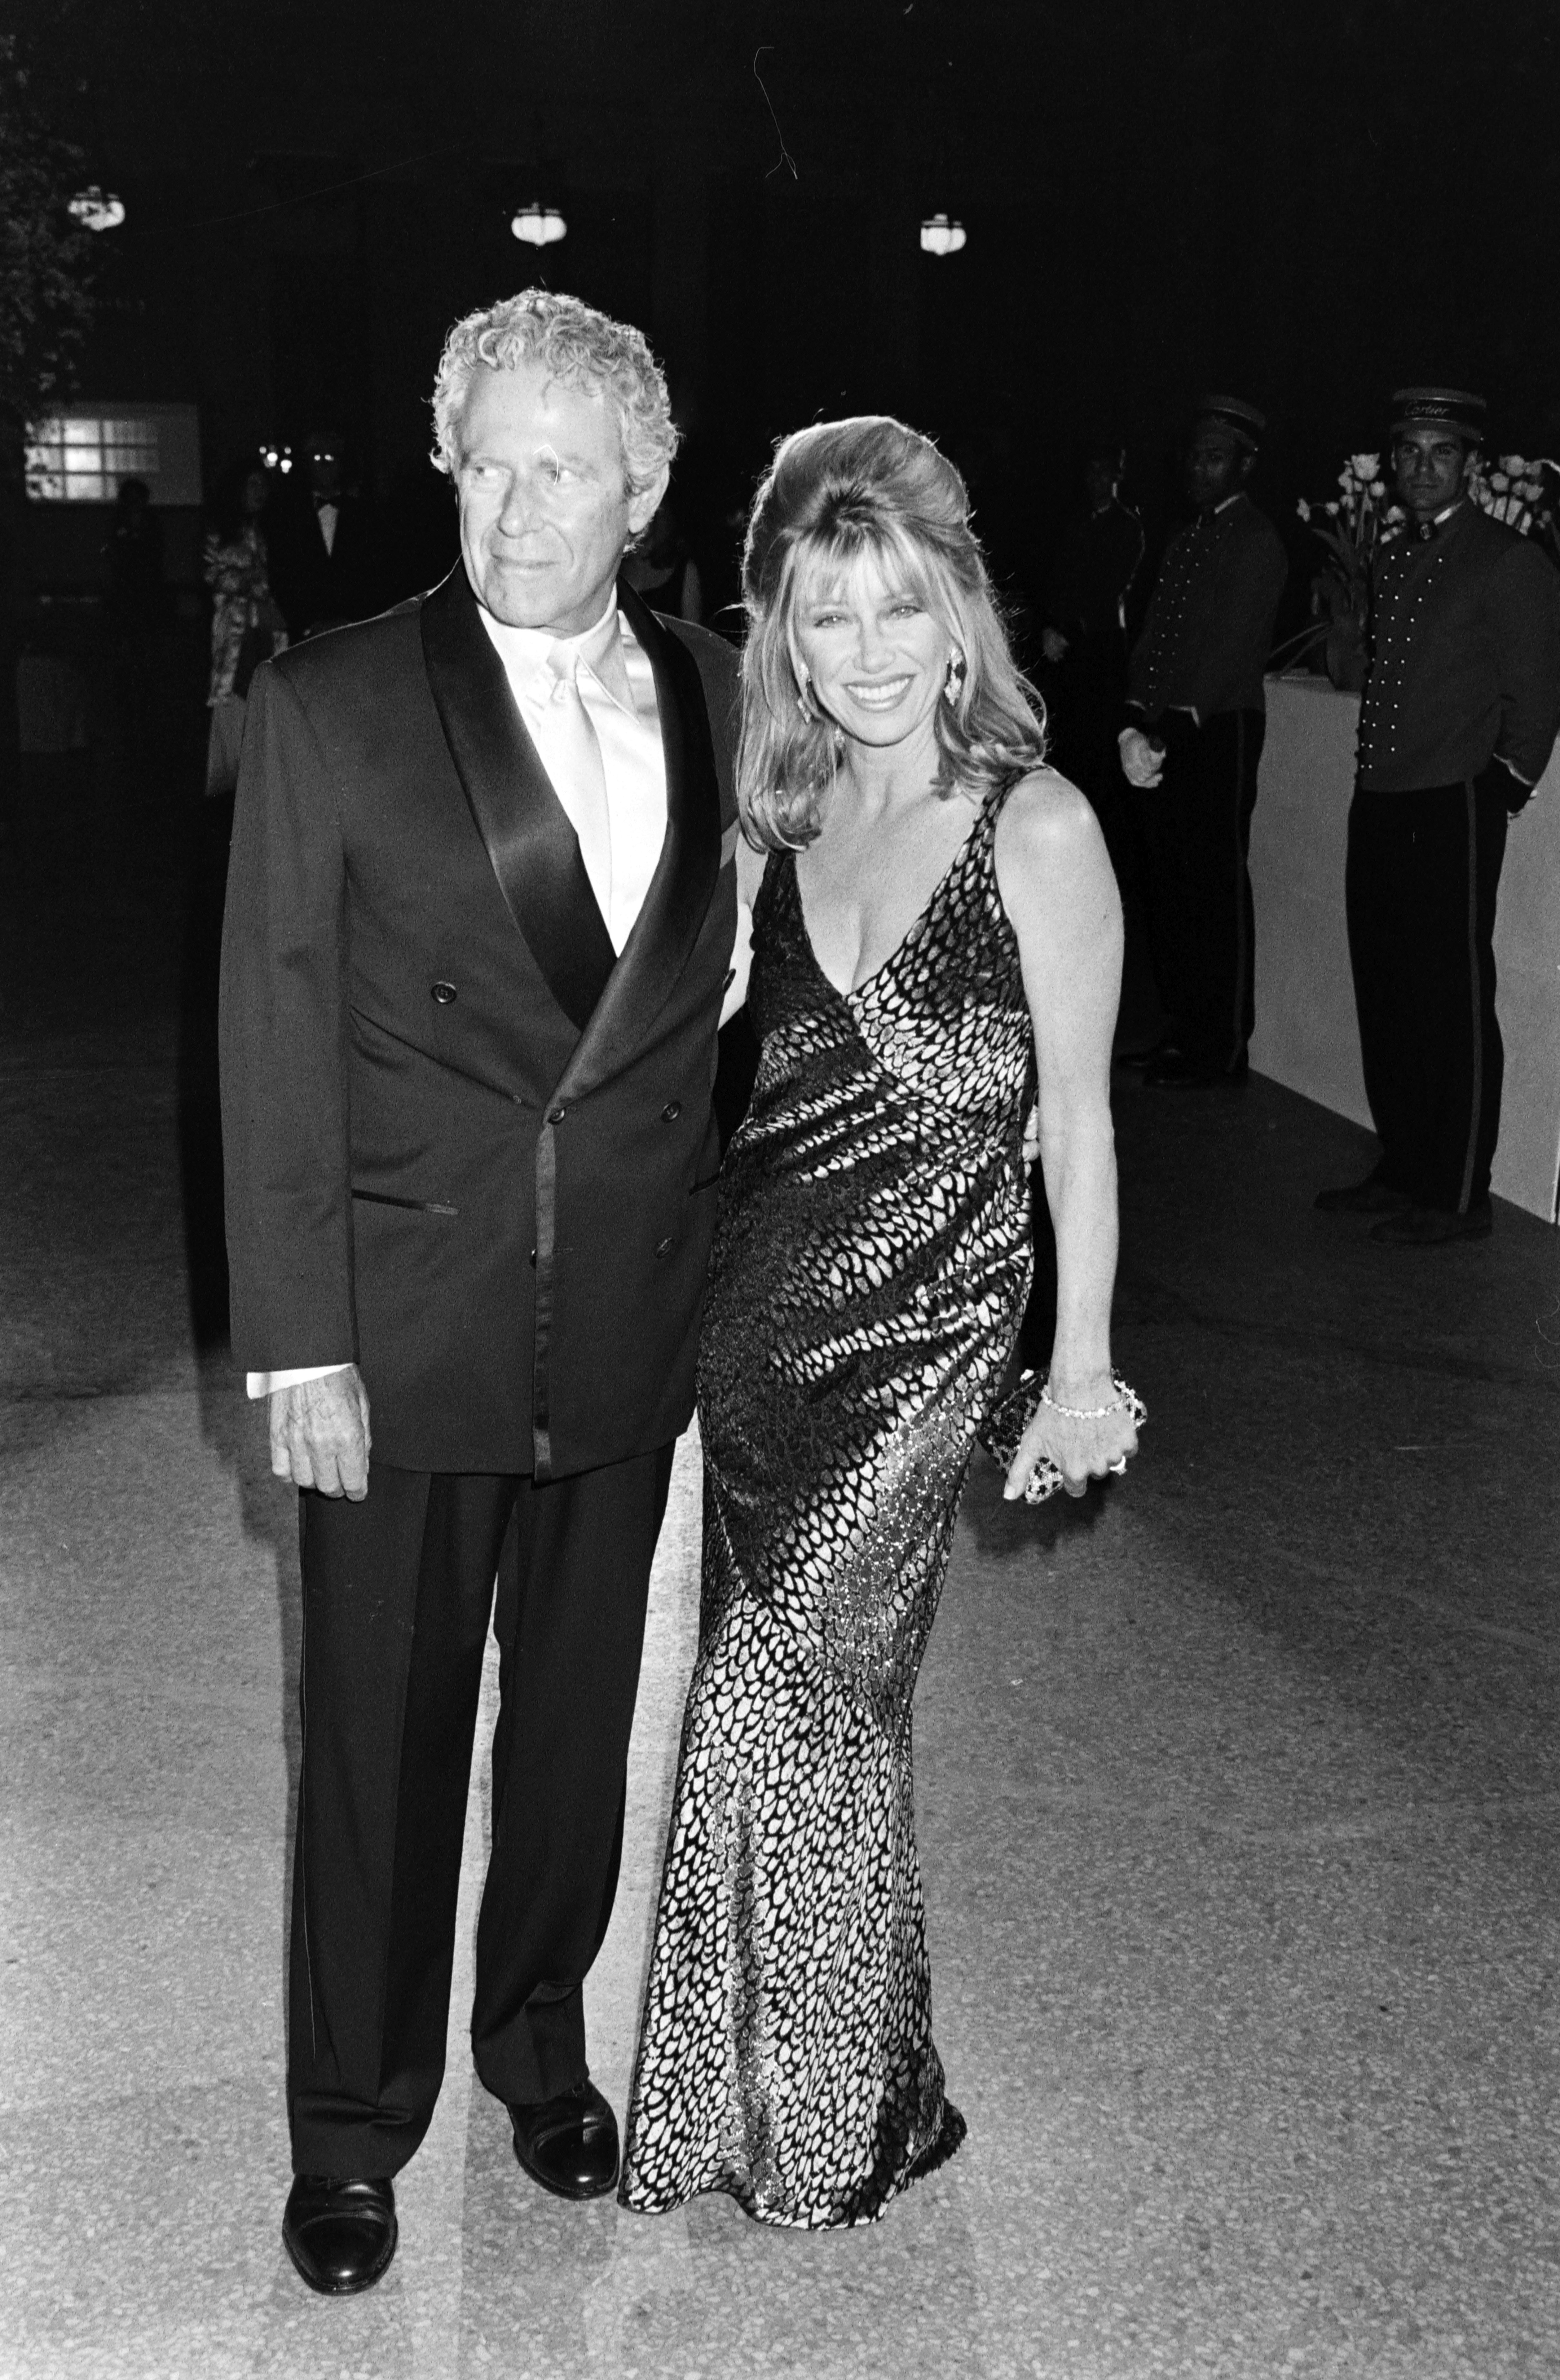 Suzanne Somers and Alan Hamel at the Cartier 150th Anniversary Gala in New York City on March 31, 1997 | Source: Getty Images